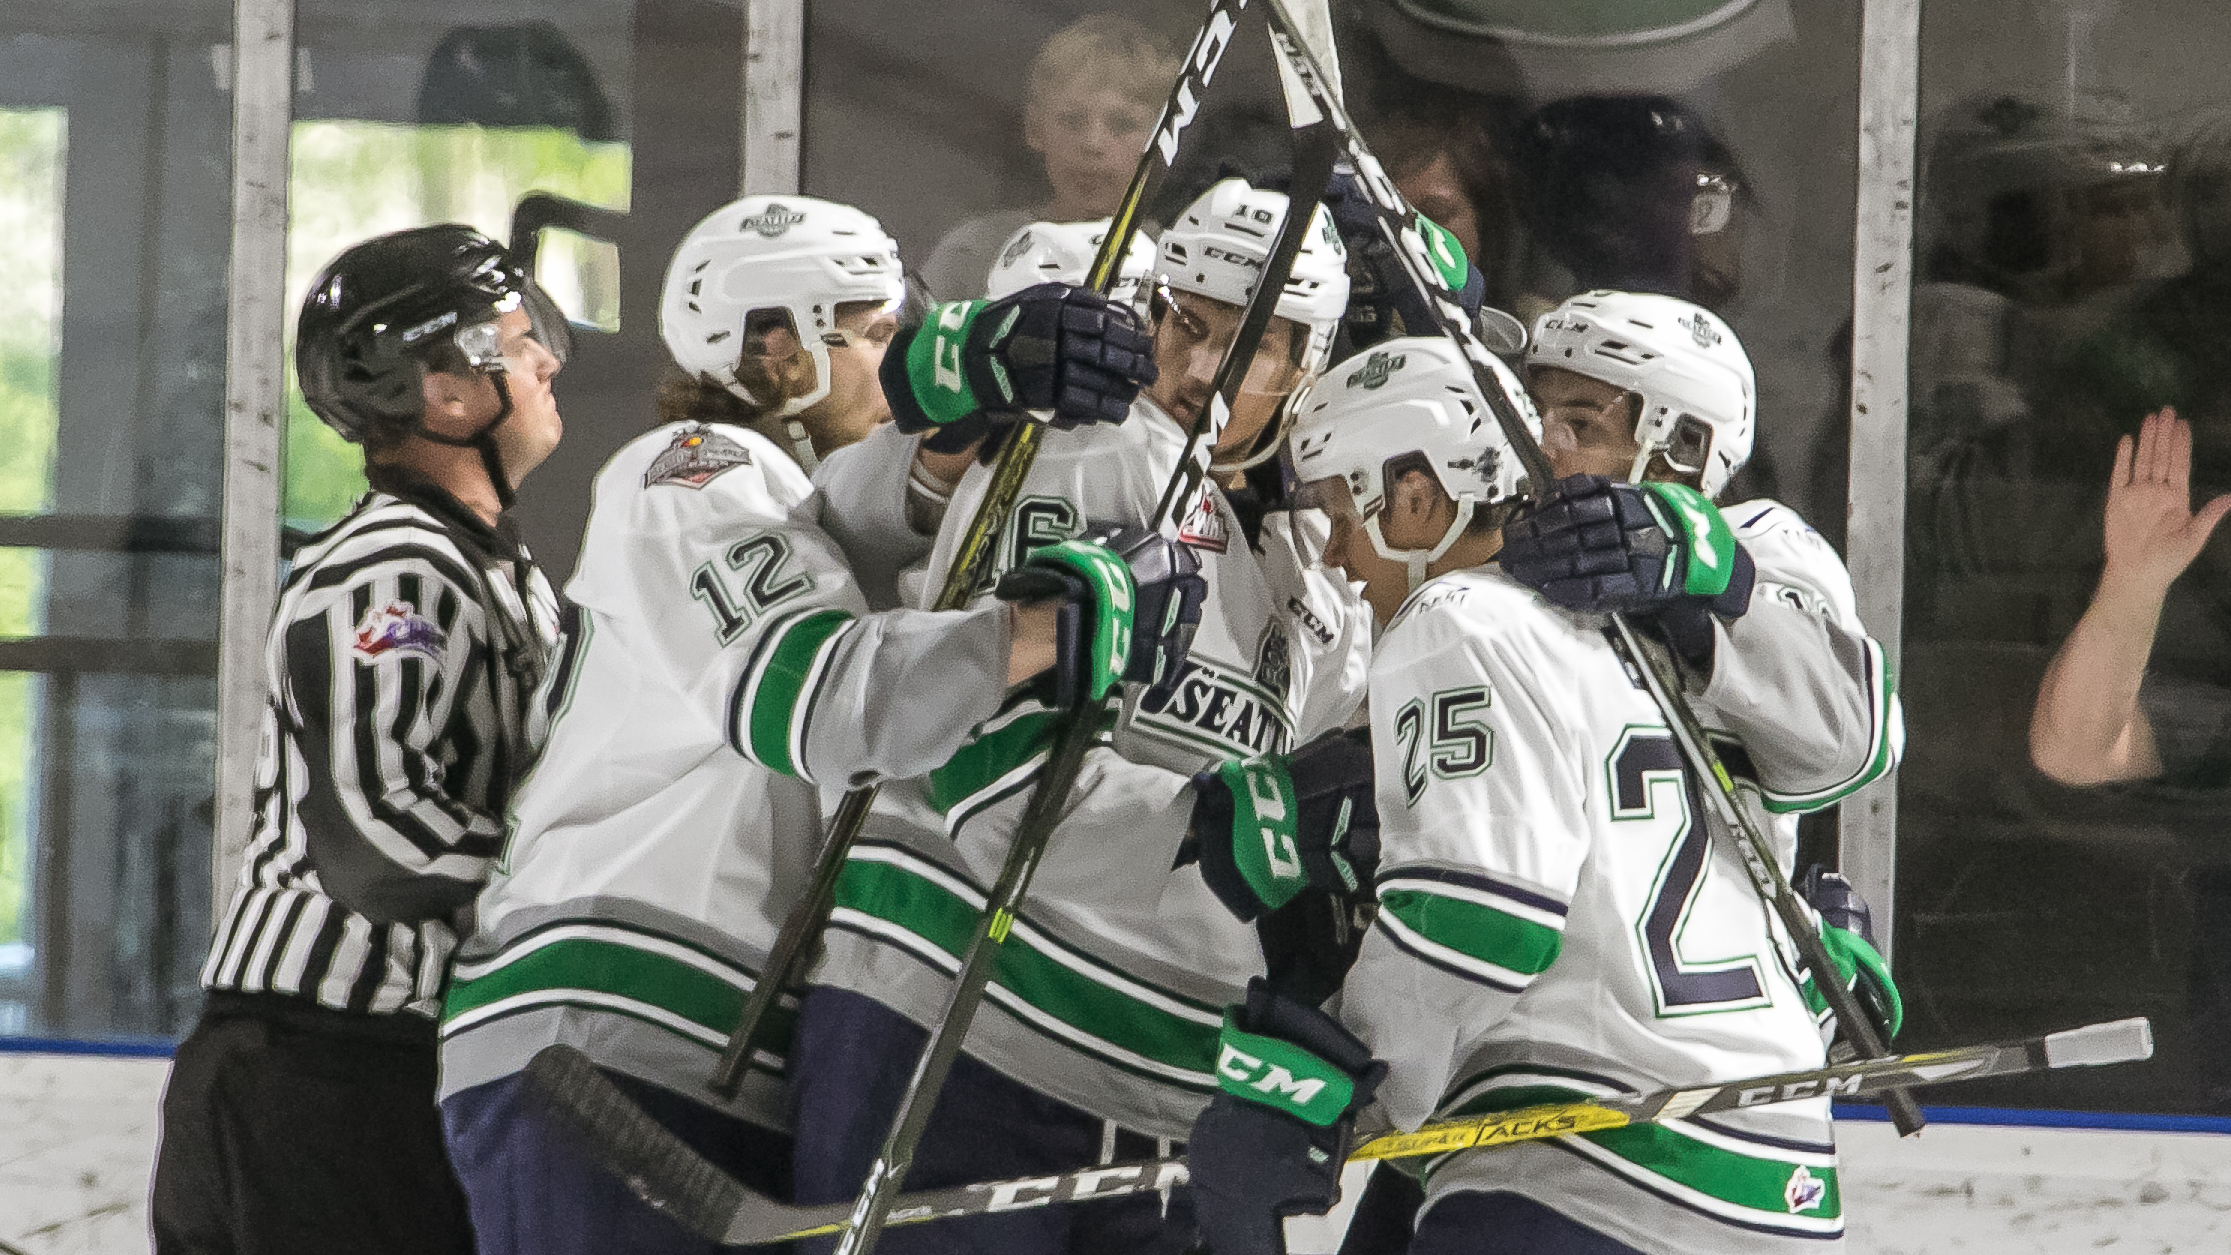 Seattle Thunderbirds going to WHL Championship 